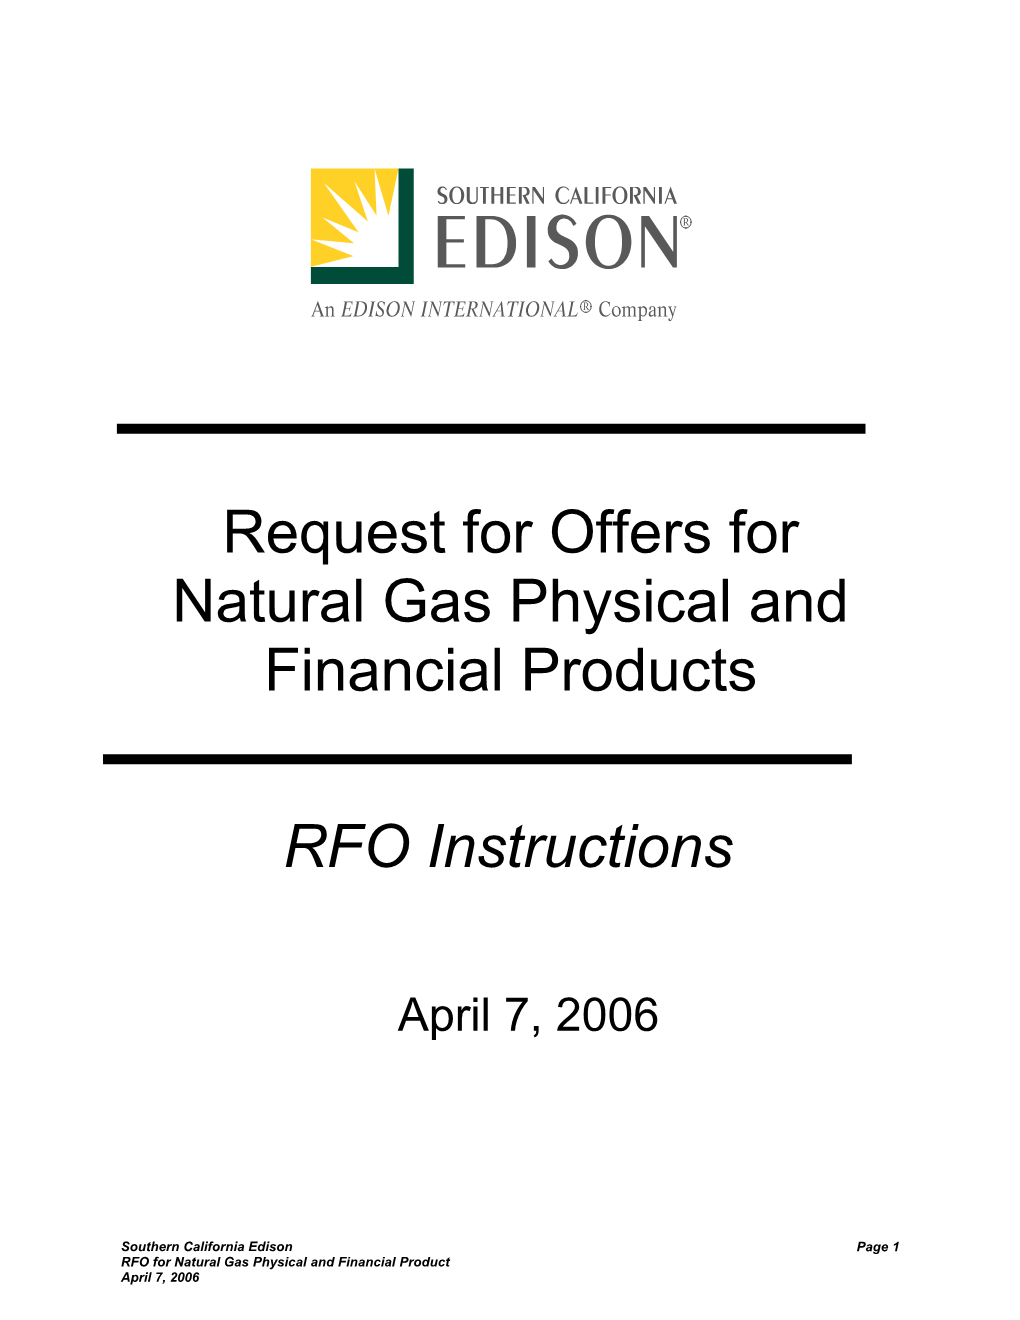 Request for Offers for Natural Gas Physical and Financial Products